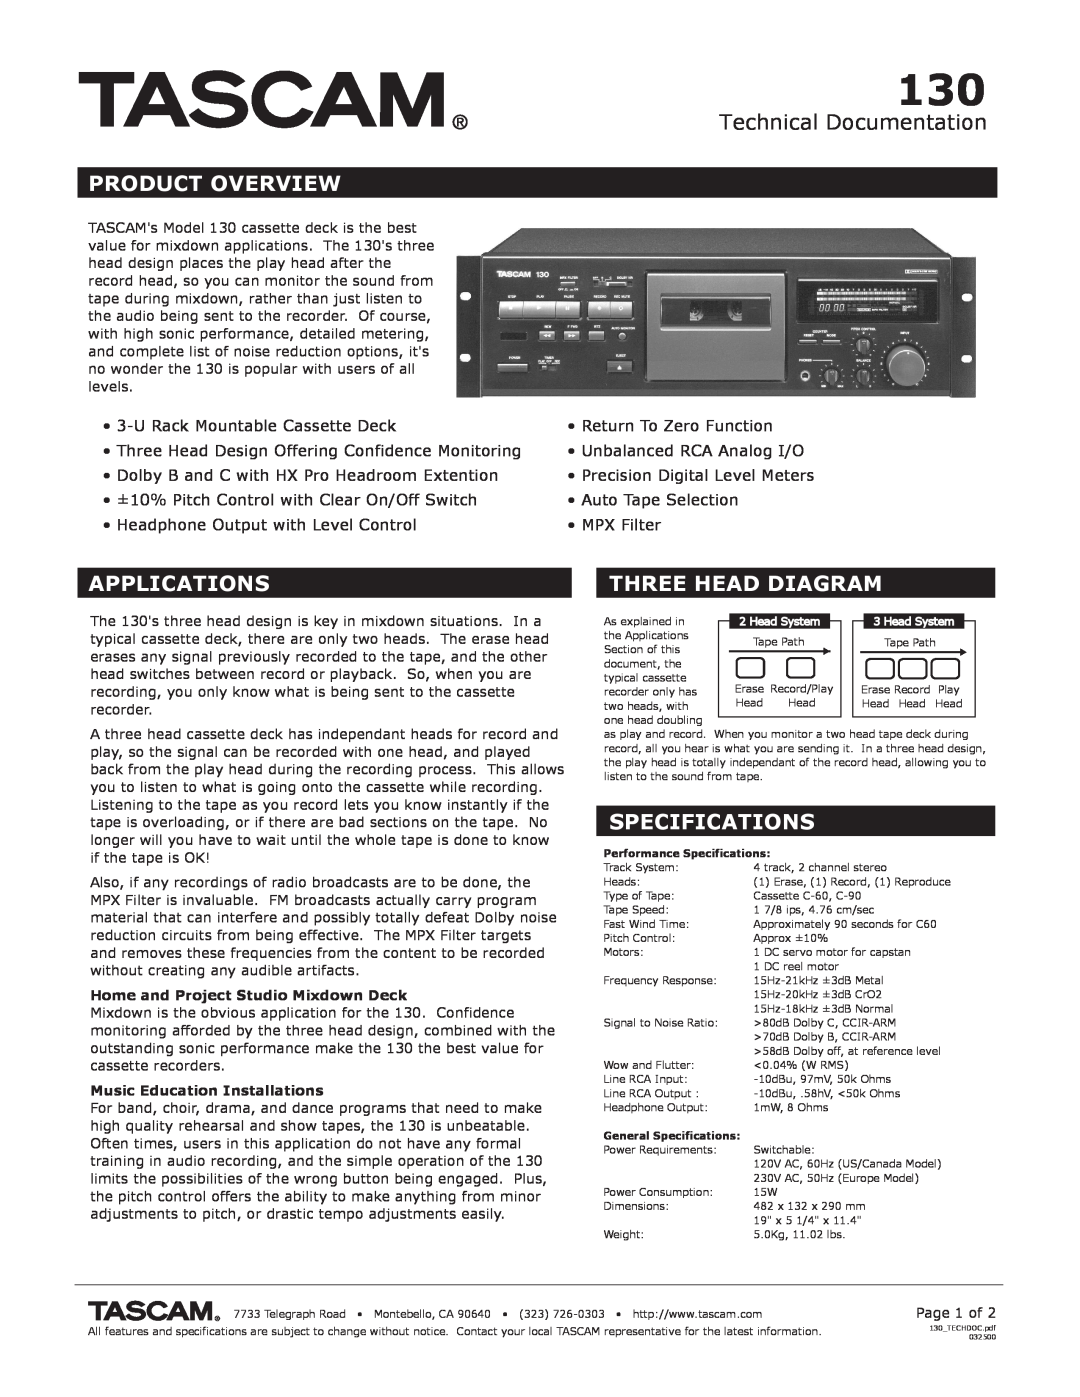 Tascam 130 specifications Technical Documentation, Product Overview, Applications, Three Head Diagram, Specifications 